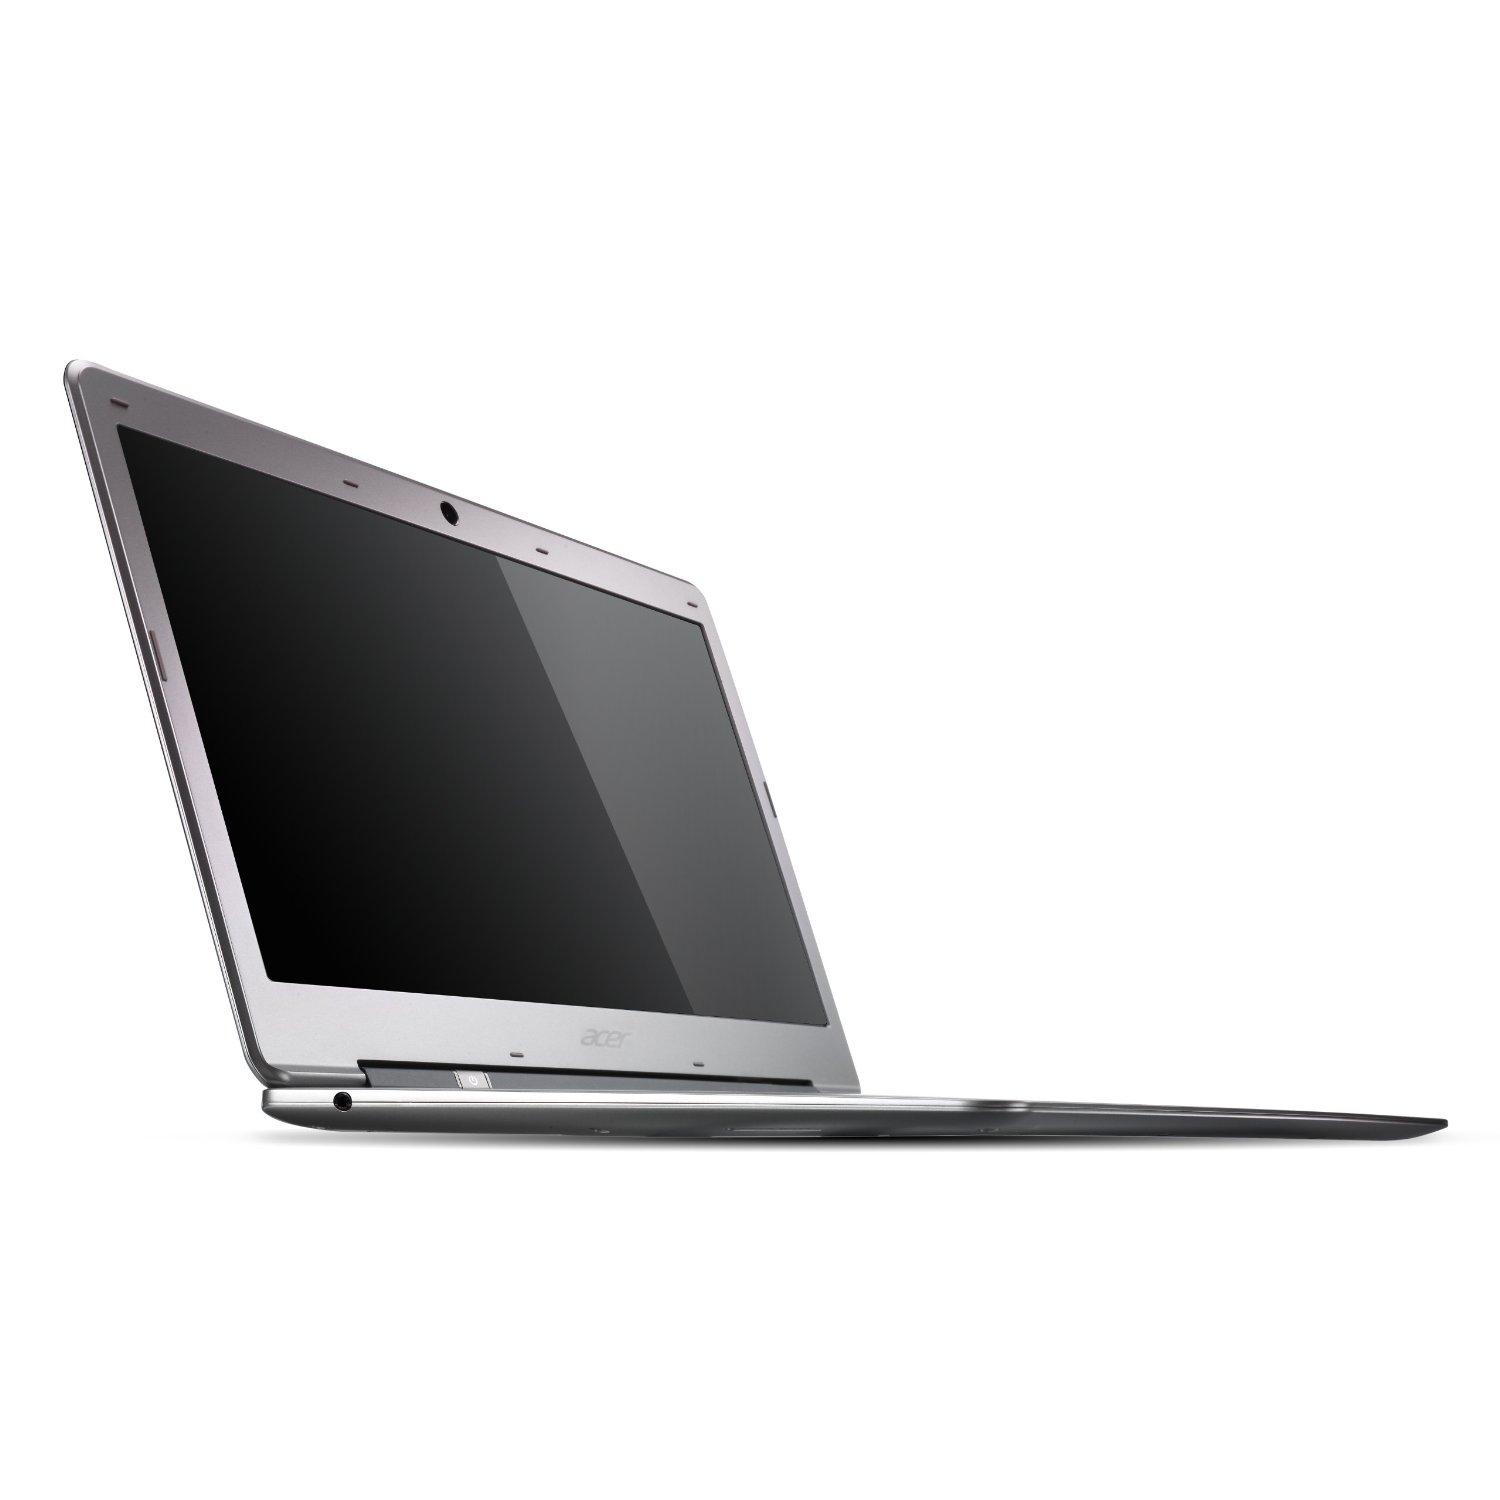 http://thetechjournal.com/wp-content/uploads/images/1110/1318646337-acer-aspire-s39516646-ultrabook-with-133inch-hd-display-7.jpg